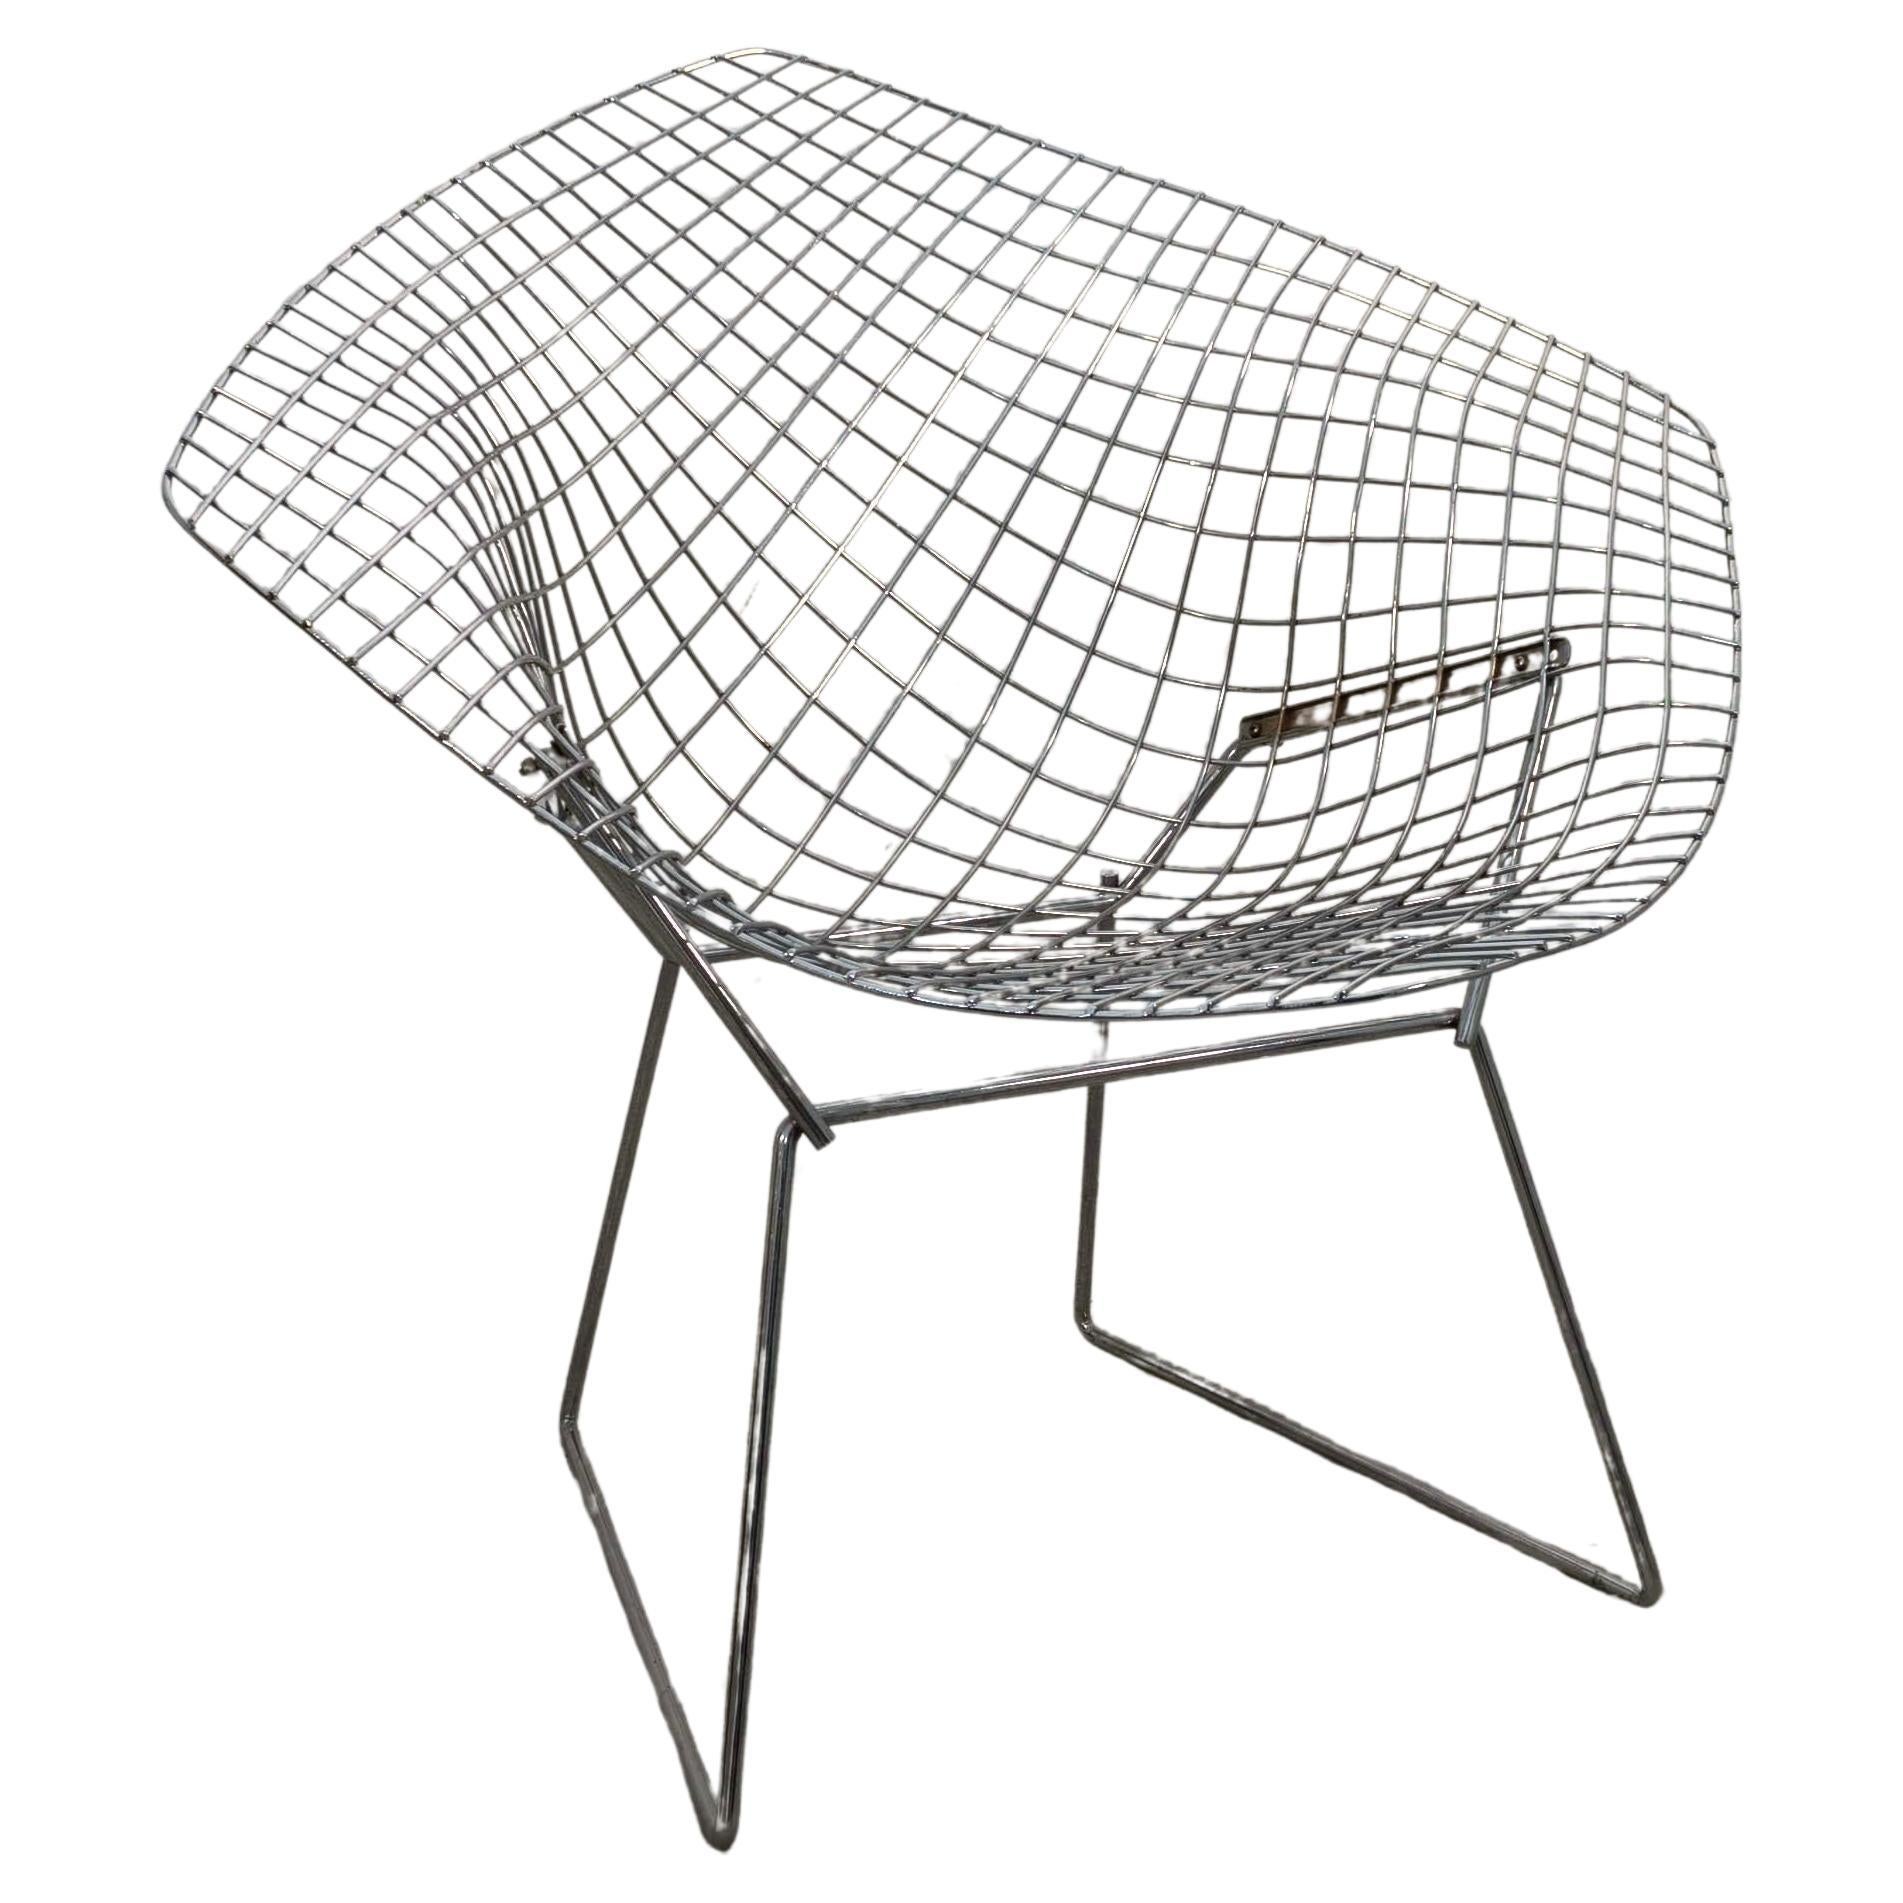 When was the Diamond Chair made?